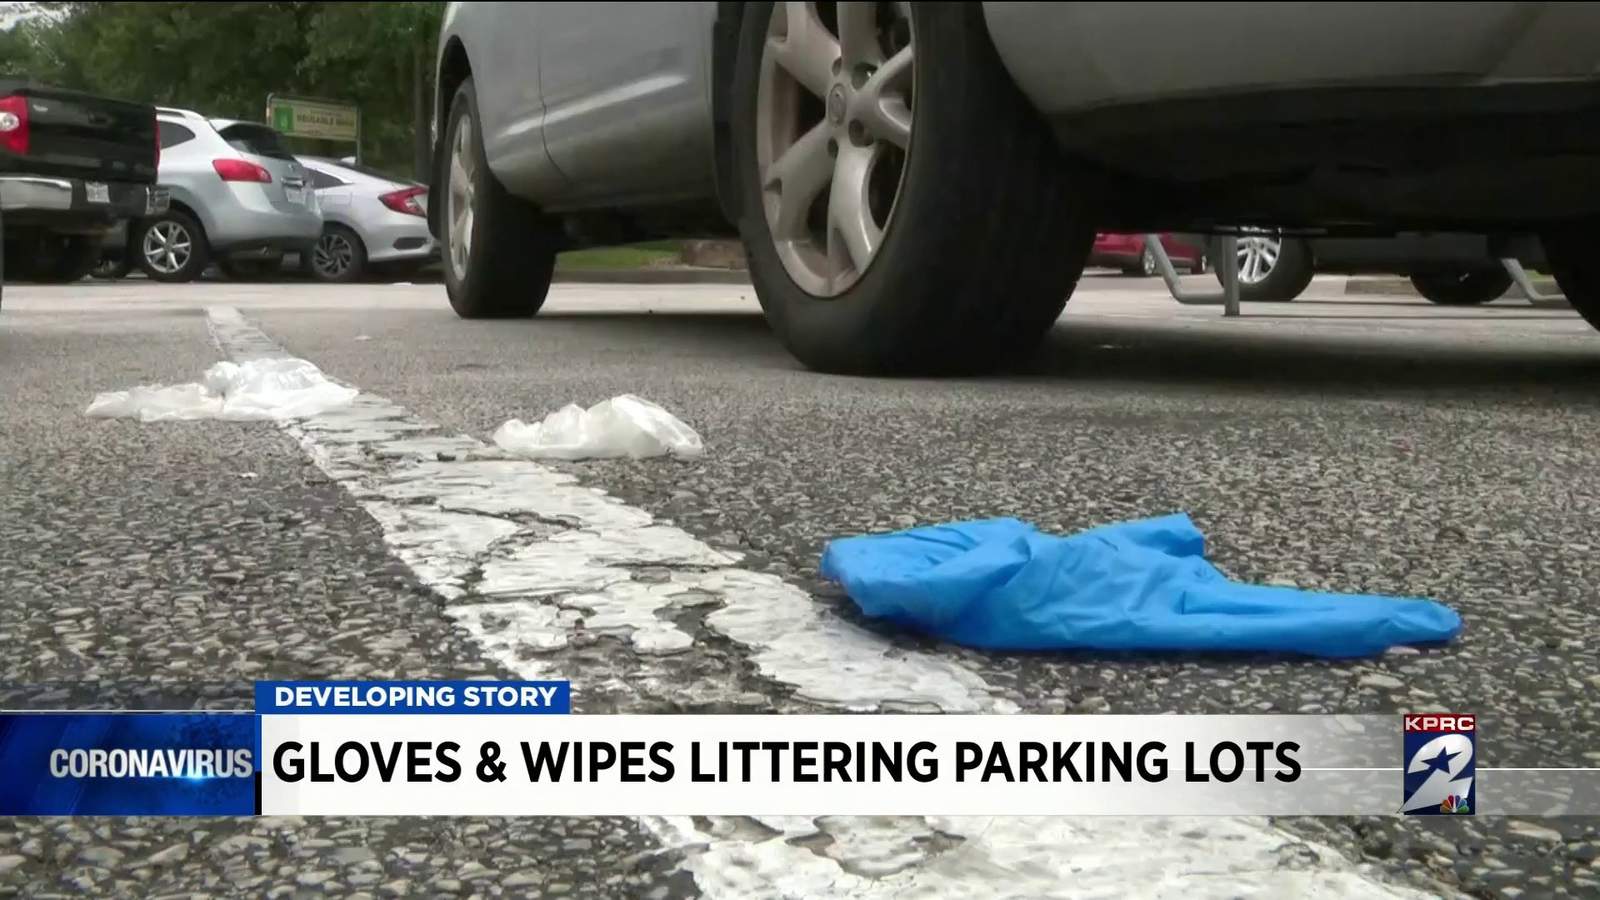 Gloves and disinfecting wipes being dumped in grocery store parking lots by customers